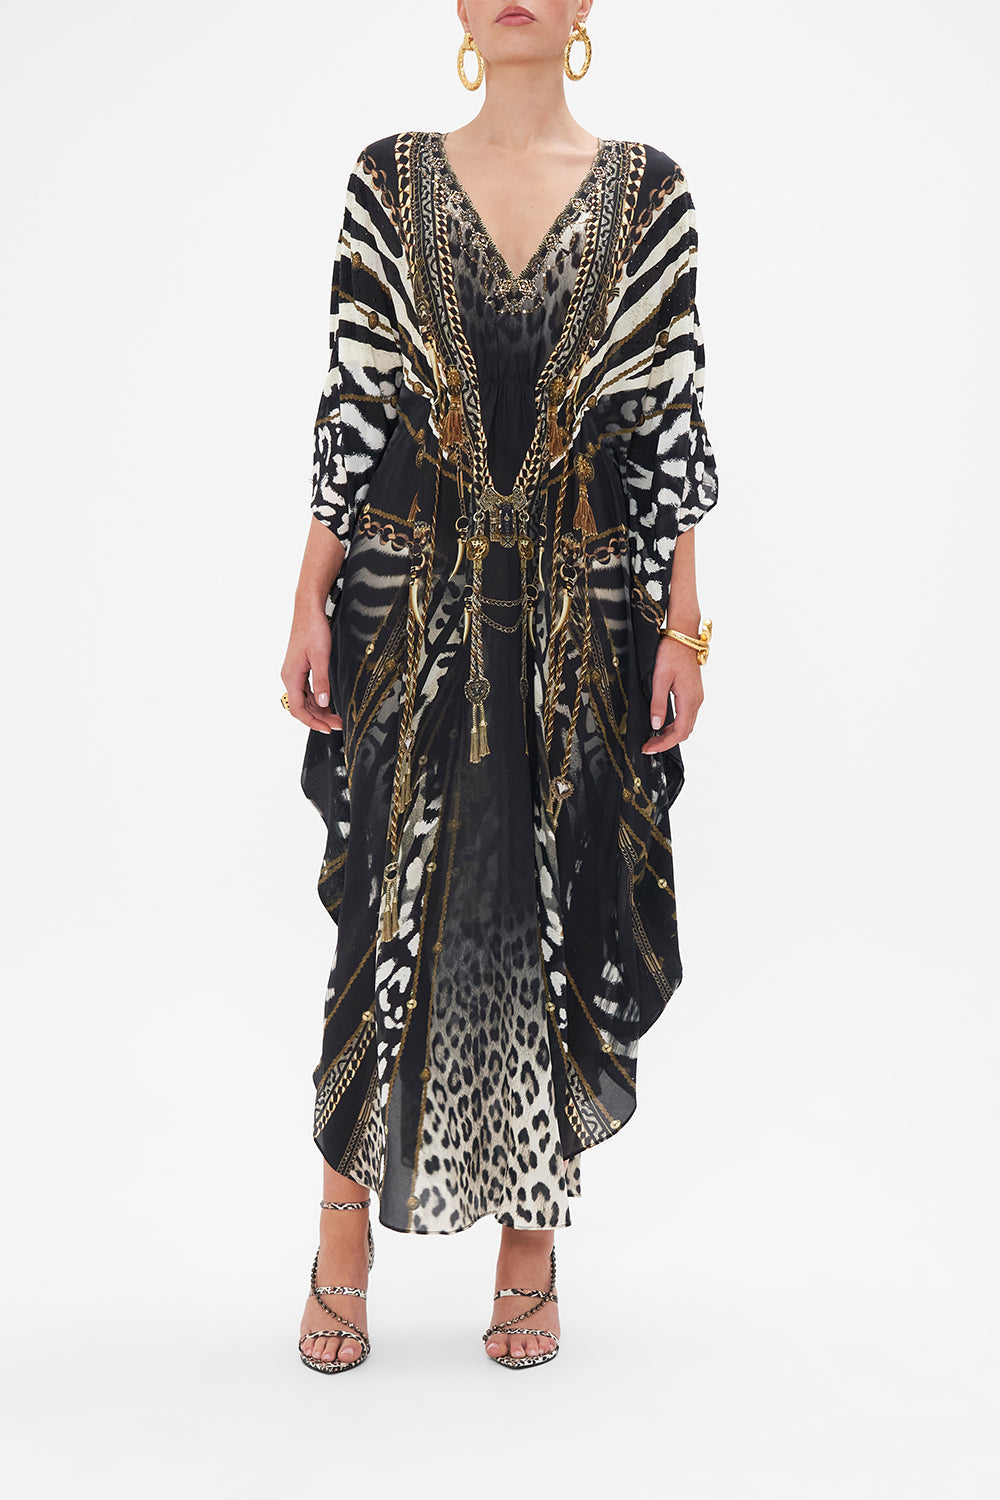 Front view of model wearing CAMILLA black and white animal print kaftan in Untamed Royalty print